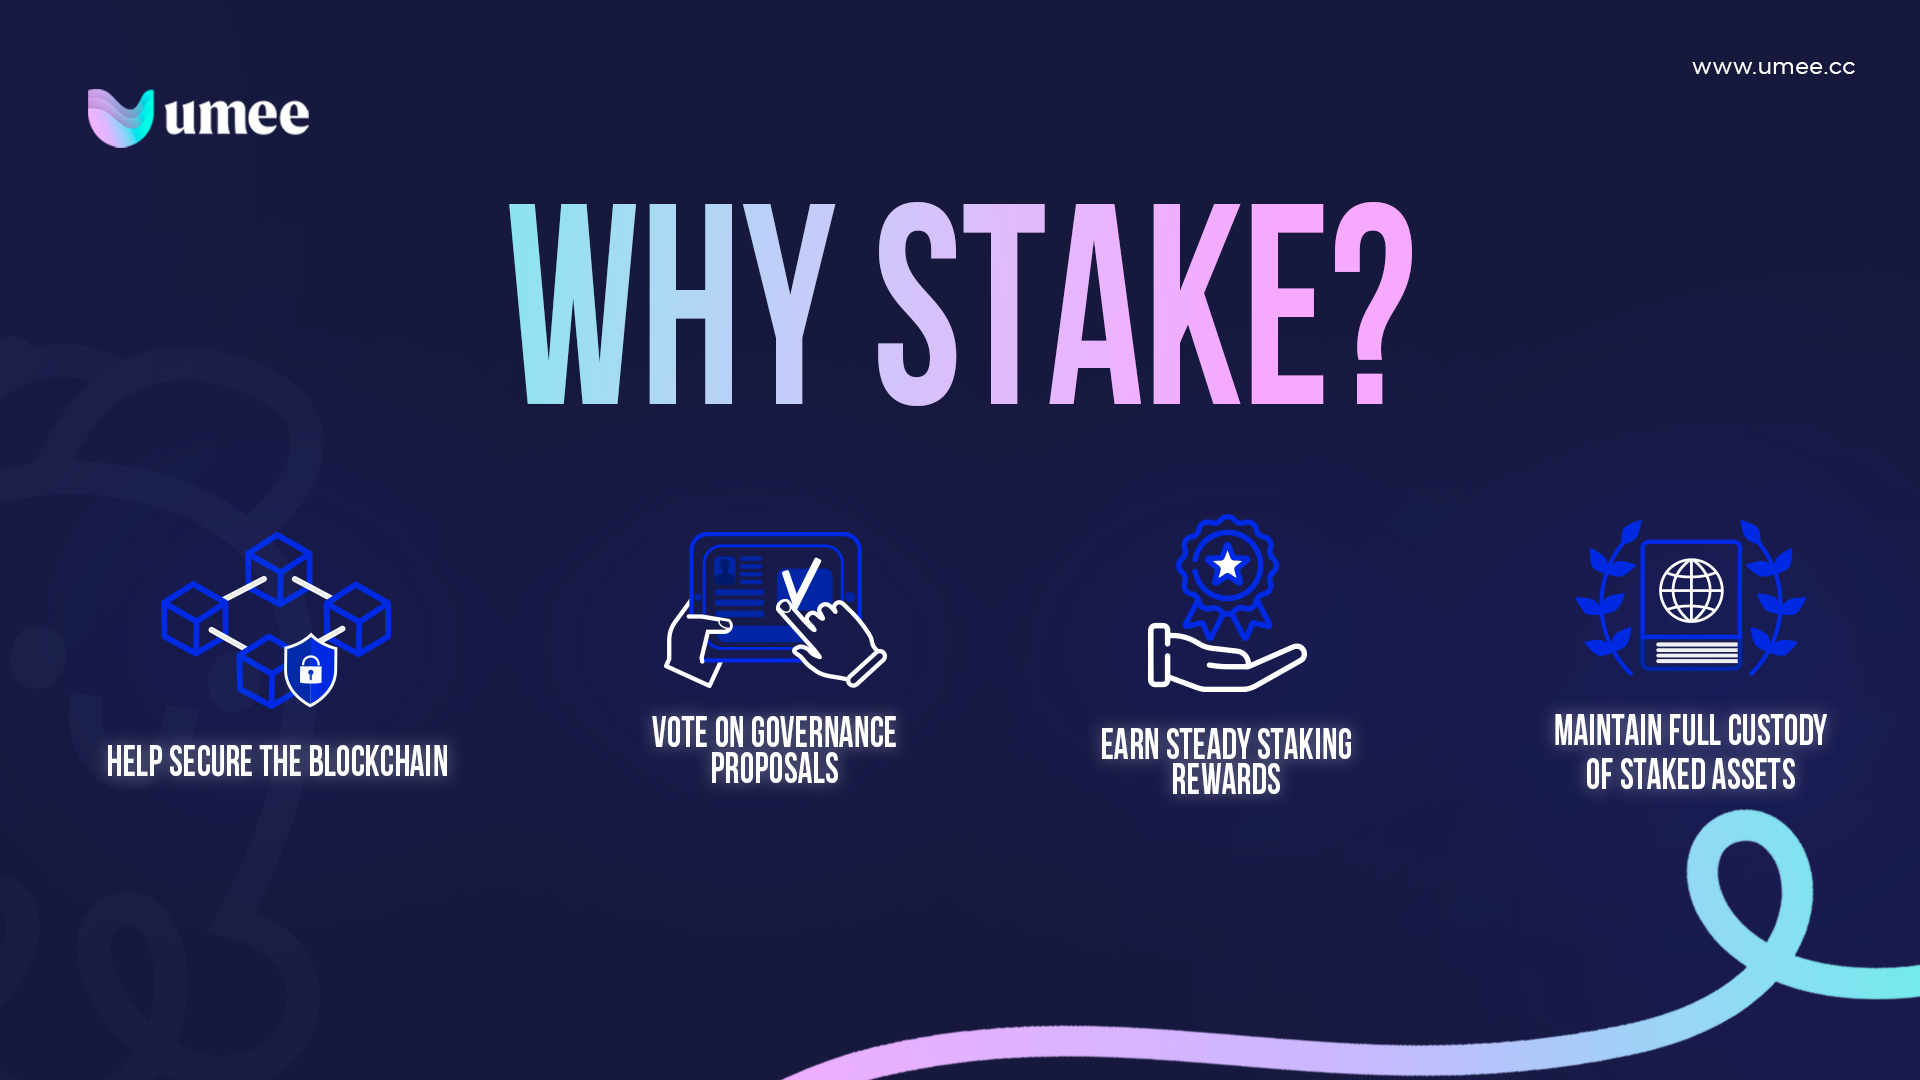 Stake UX to help secure the blockchain, vote on governance proposals, and earn steady staking rewards